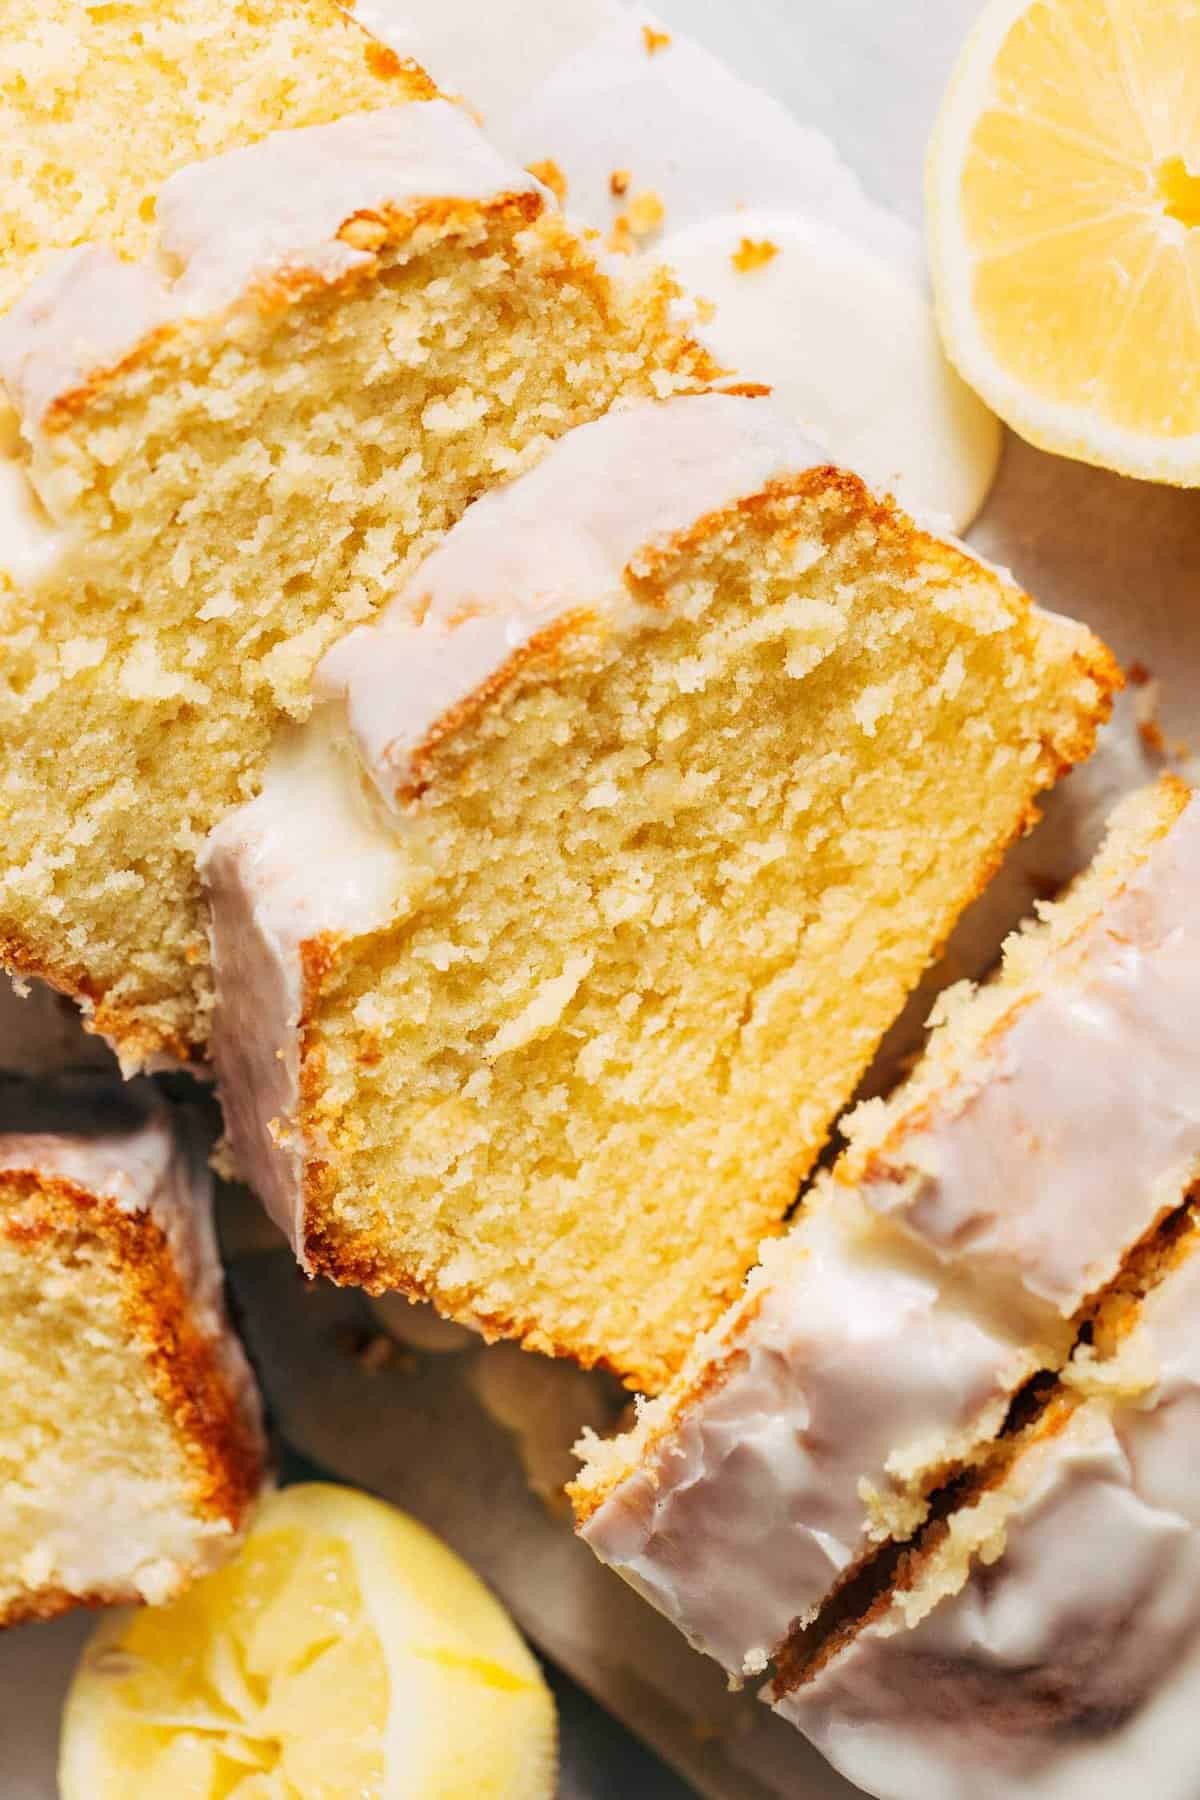 24 Loaf Cake Recipes That Will Have You Baking in Bliss! | DineWithDrinks